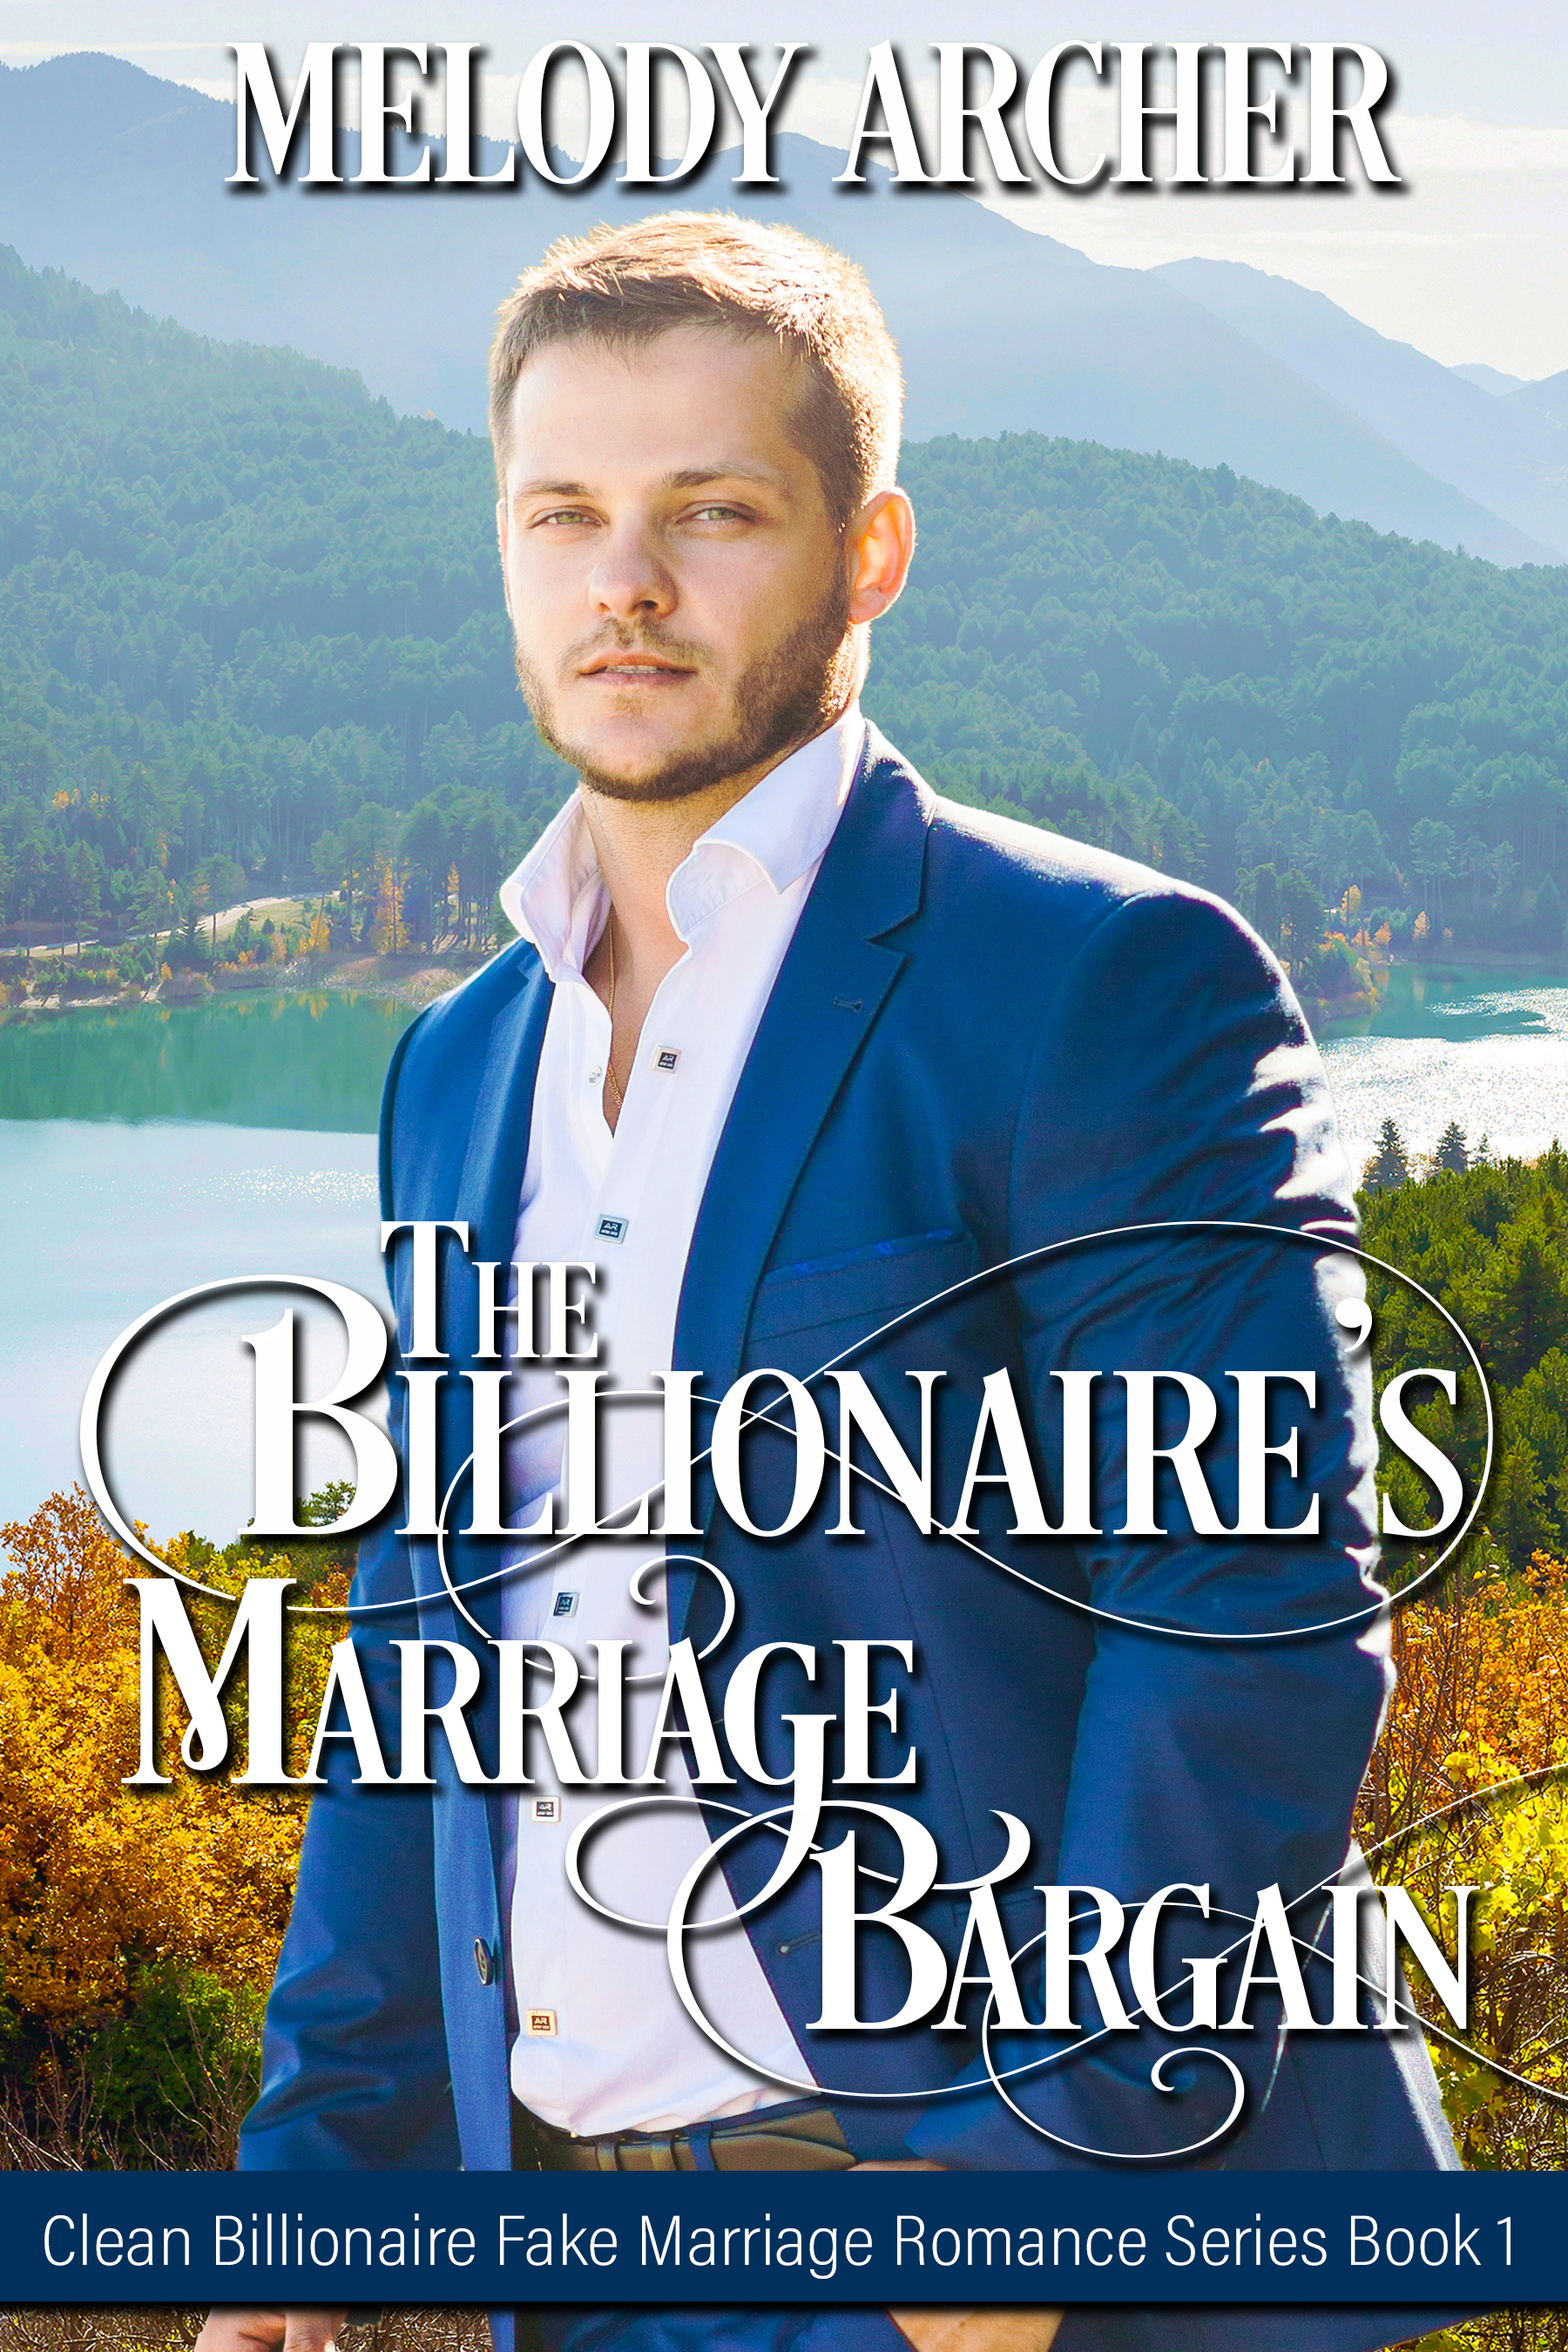 About Book One in the New Clean Billionaire Fake Marriage Romance series…